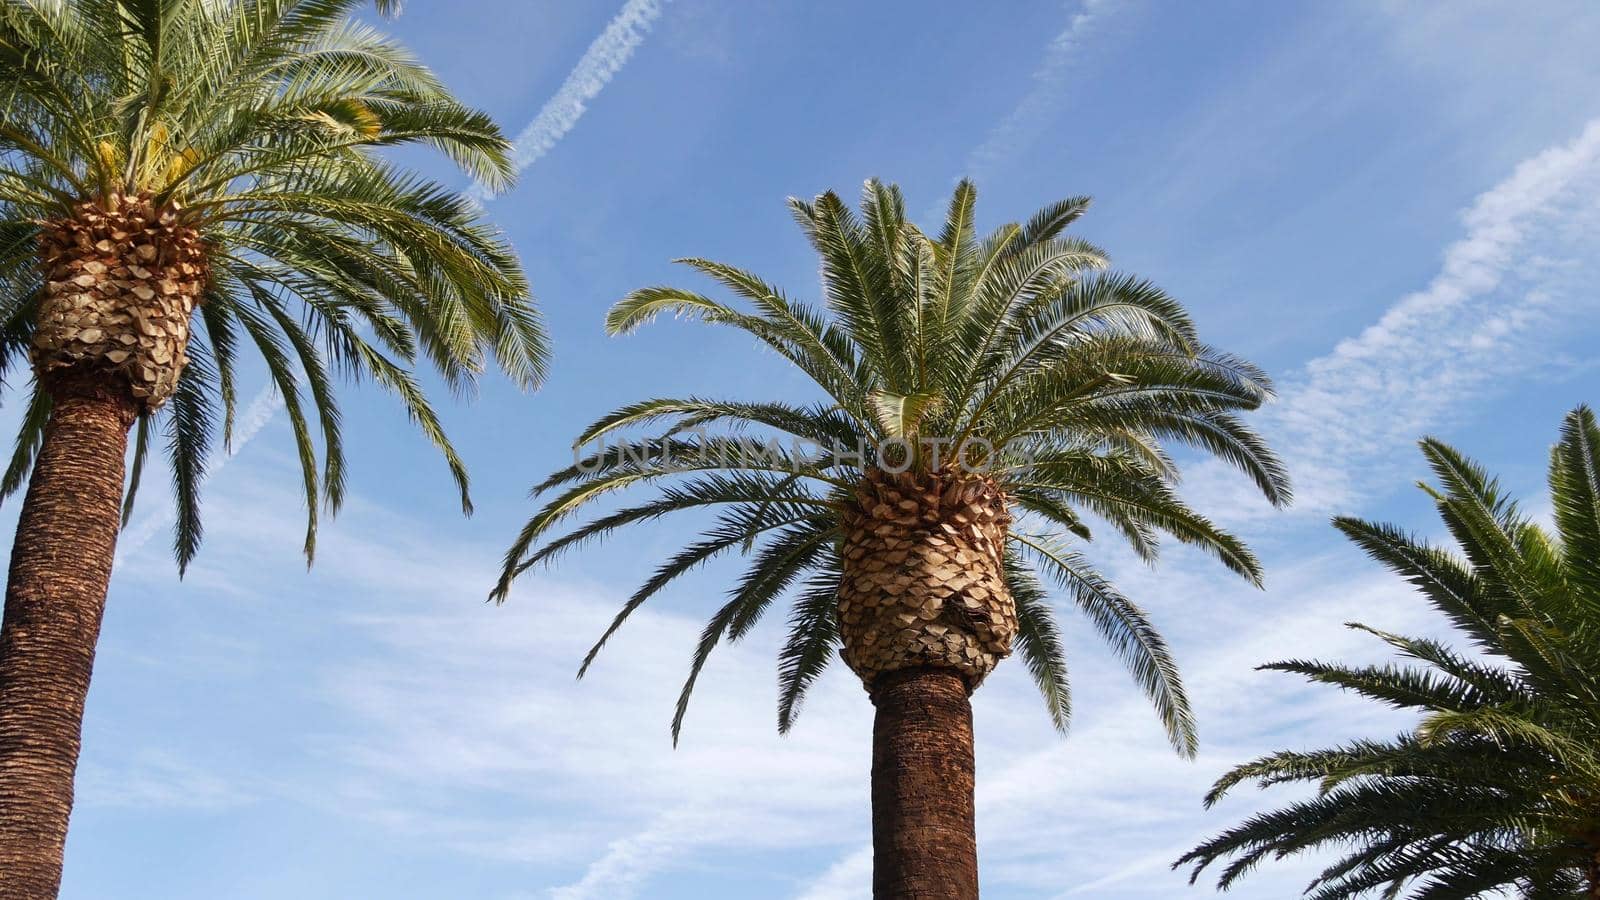 Palms in Los Angeles, California, USA. Summertime aesthetic of Santa Monica and Venice Beach on Pacific ocean. Clear blue sky and iconic palm trees. Atmosphere of Beverly Hills in Hollywood. LA vibes by DogoraSun